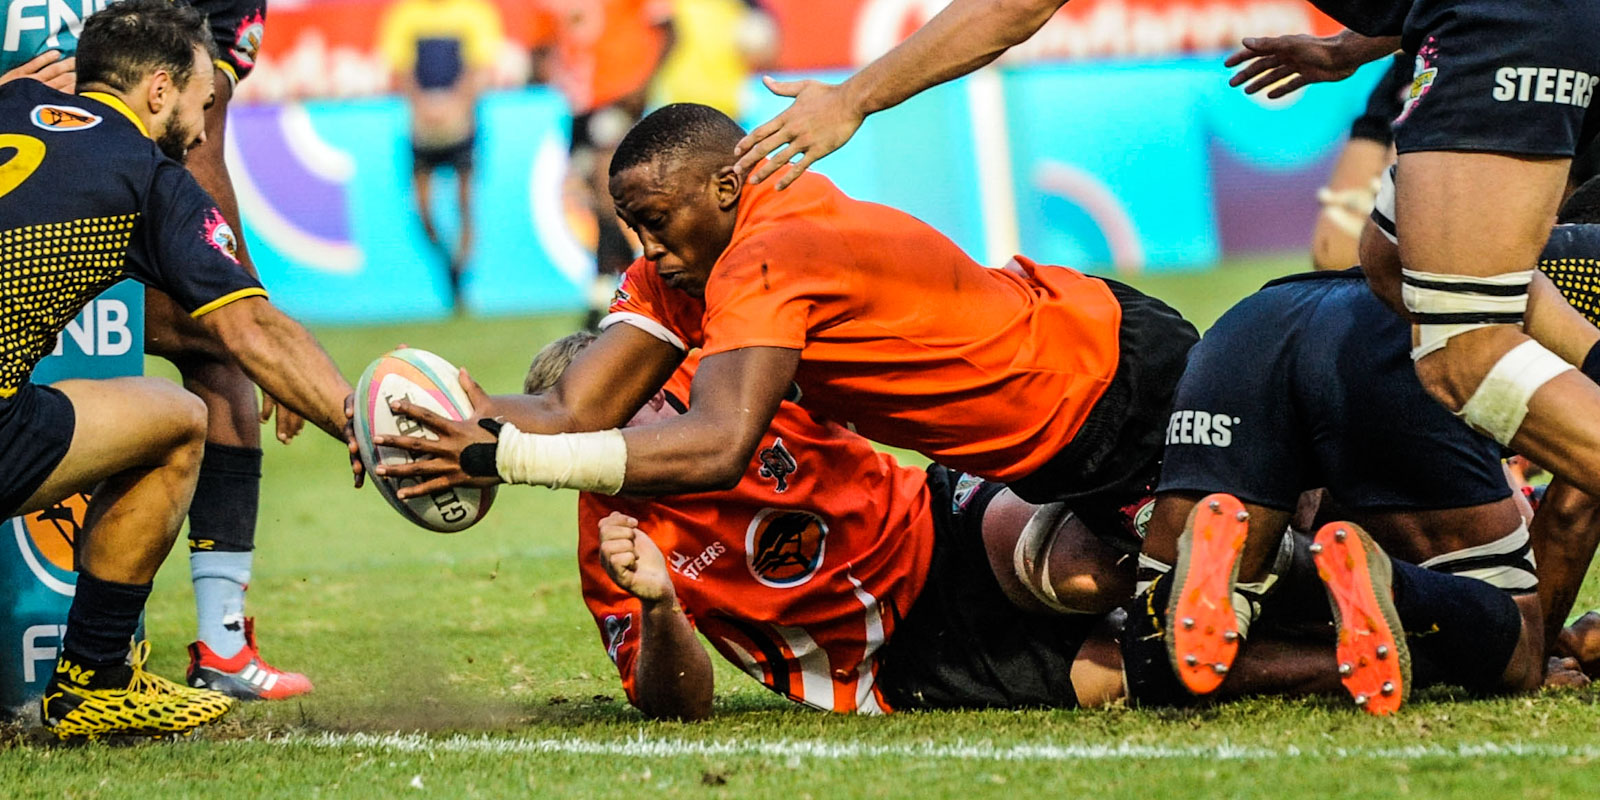 UJ broke a long losing streak with a deserved victory over the Madibaz.